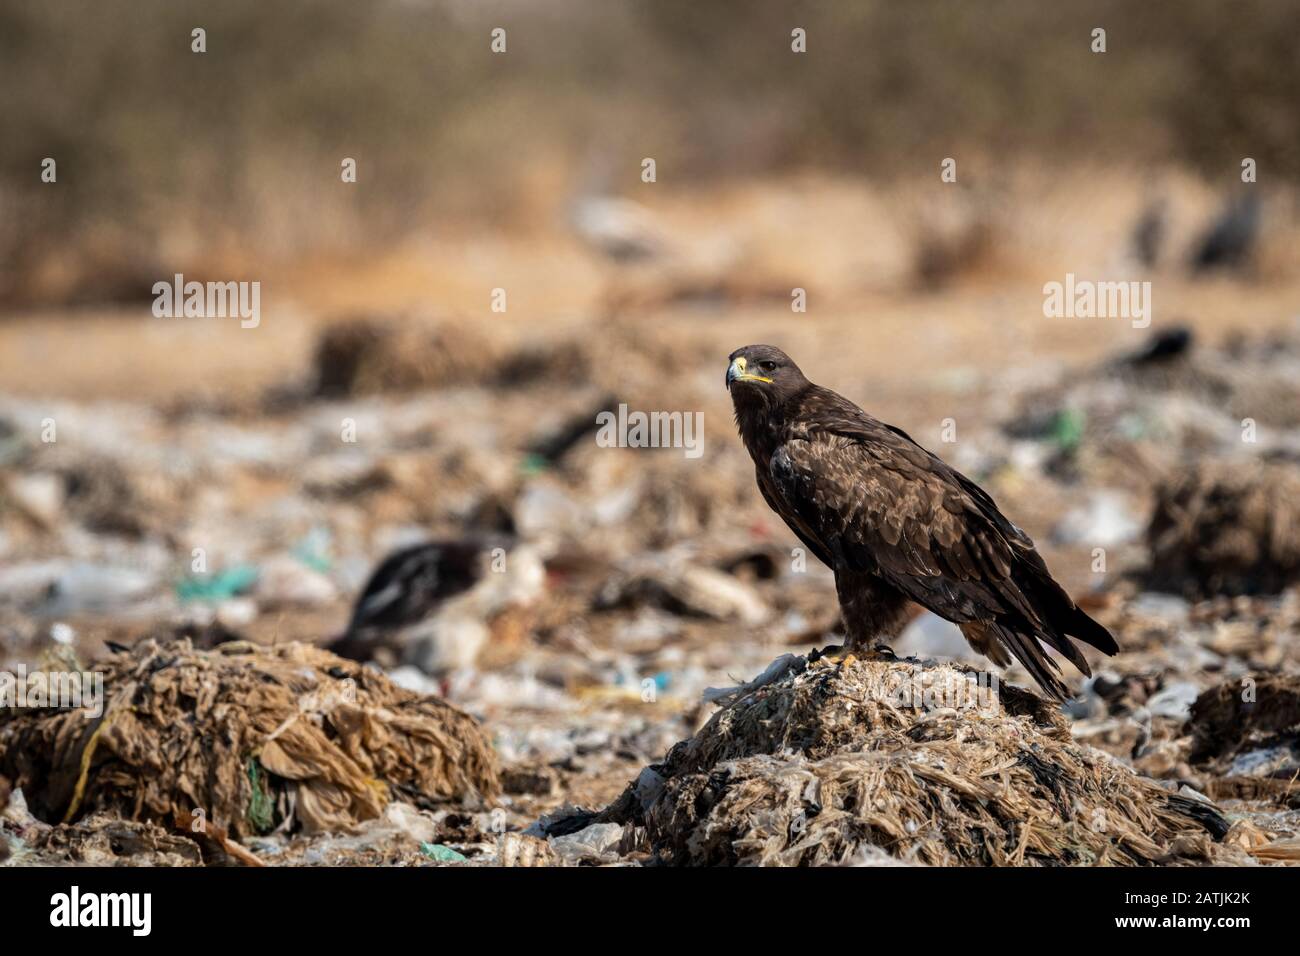 Steppe eagle or Aquila nipalensis portrait or close-up during winter migration at jorbeer conservation reserve or dumping yard, bikaner, india Stock Photo